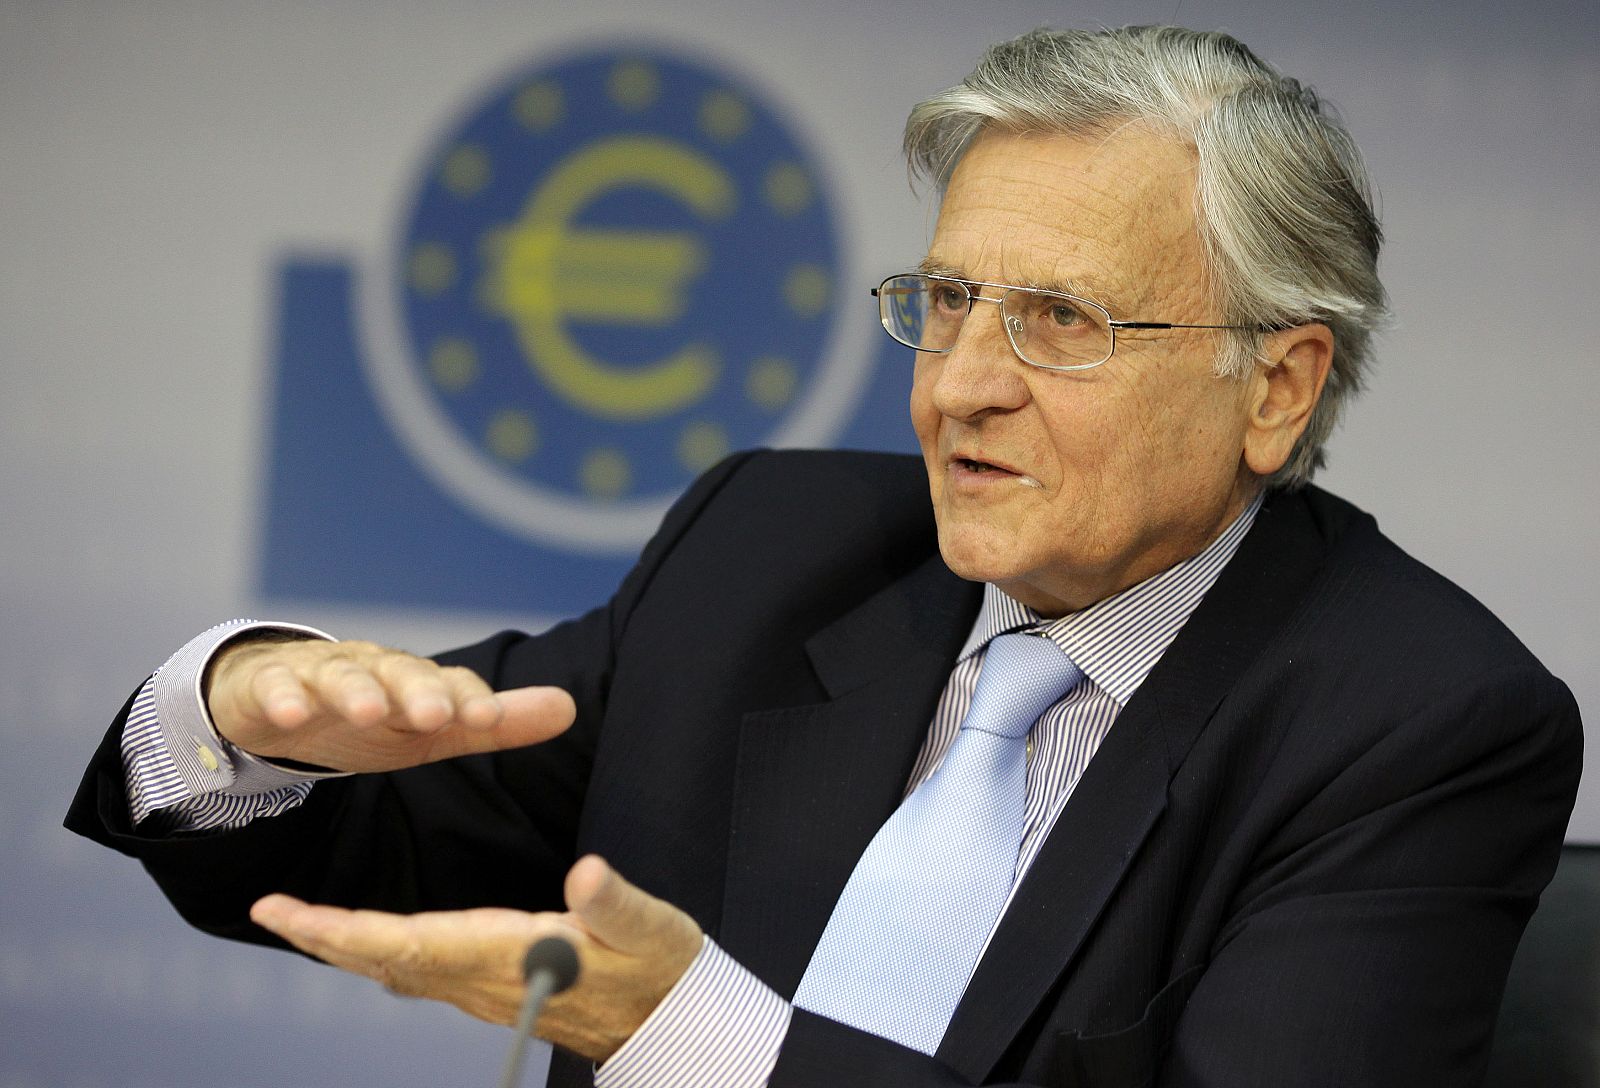 Jean-Claude Trichet, President of the European Central Bank (ECB) answers reporter's questions during his monthly news conference at the ECB headquarter in Frankfurt